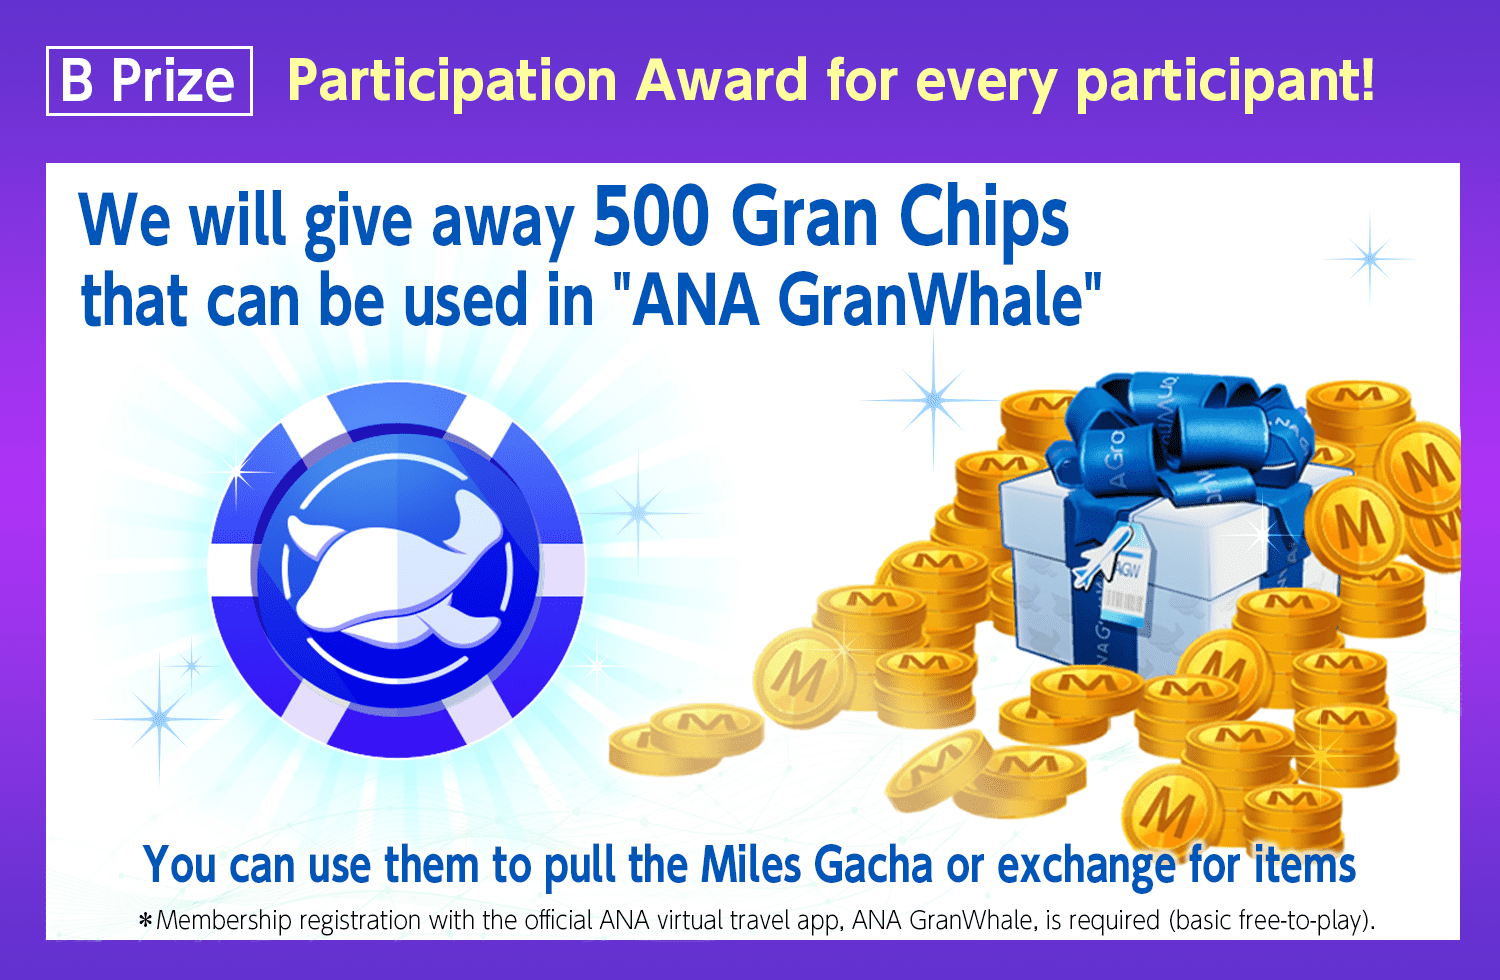 B Prize: Participation Award for every participant!We will give away 500 Gran Chips that can be used in 'ANA GranWhale' You can use them to pull the Miles Gacha or exchange for items